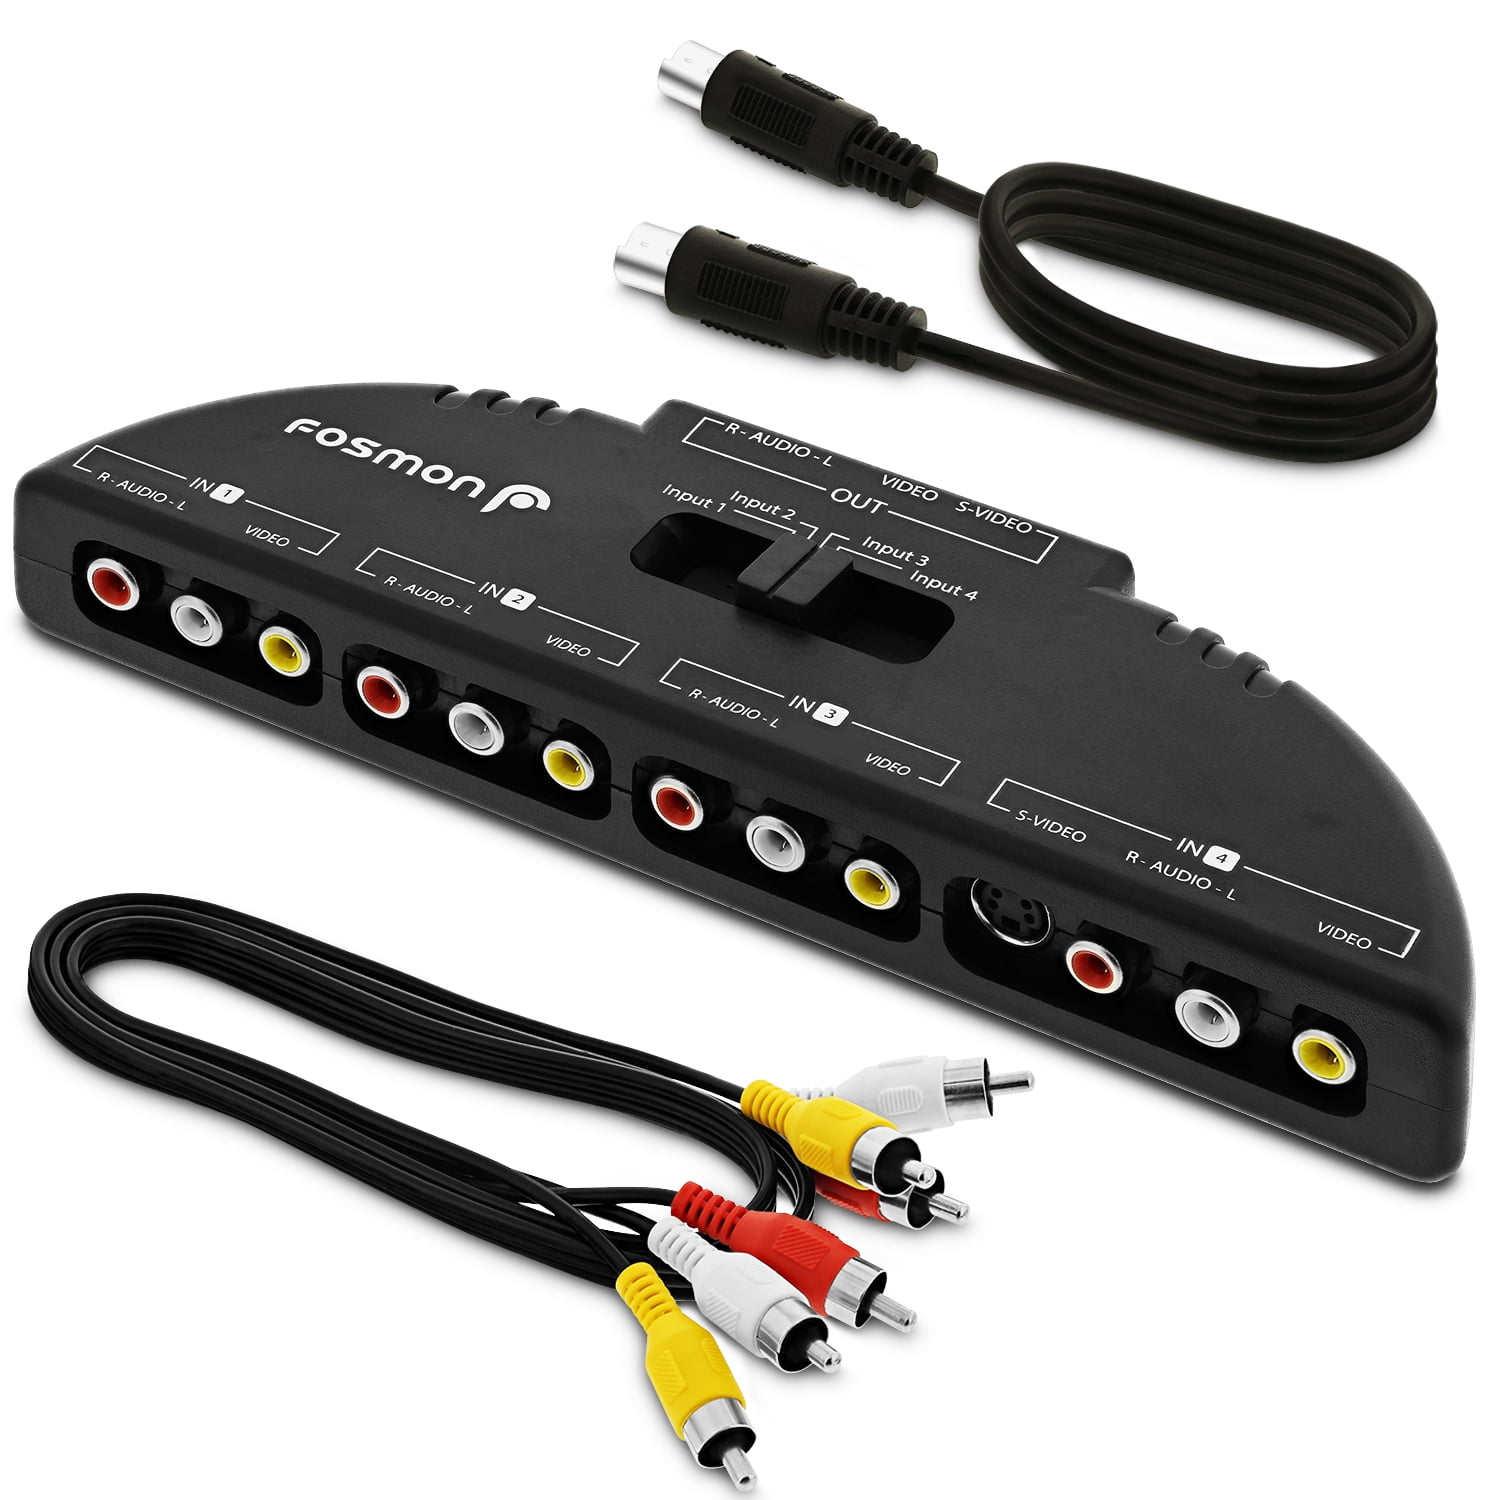 Fosmon RCA Splitter with 4-Way Audio, Video RCA Switch Selector Box + RCA Patch Cable and S-Video Cable Connecting 4 RCA Output Devices to Your TV - Walmart.com